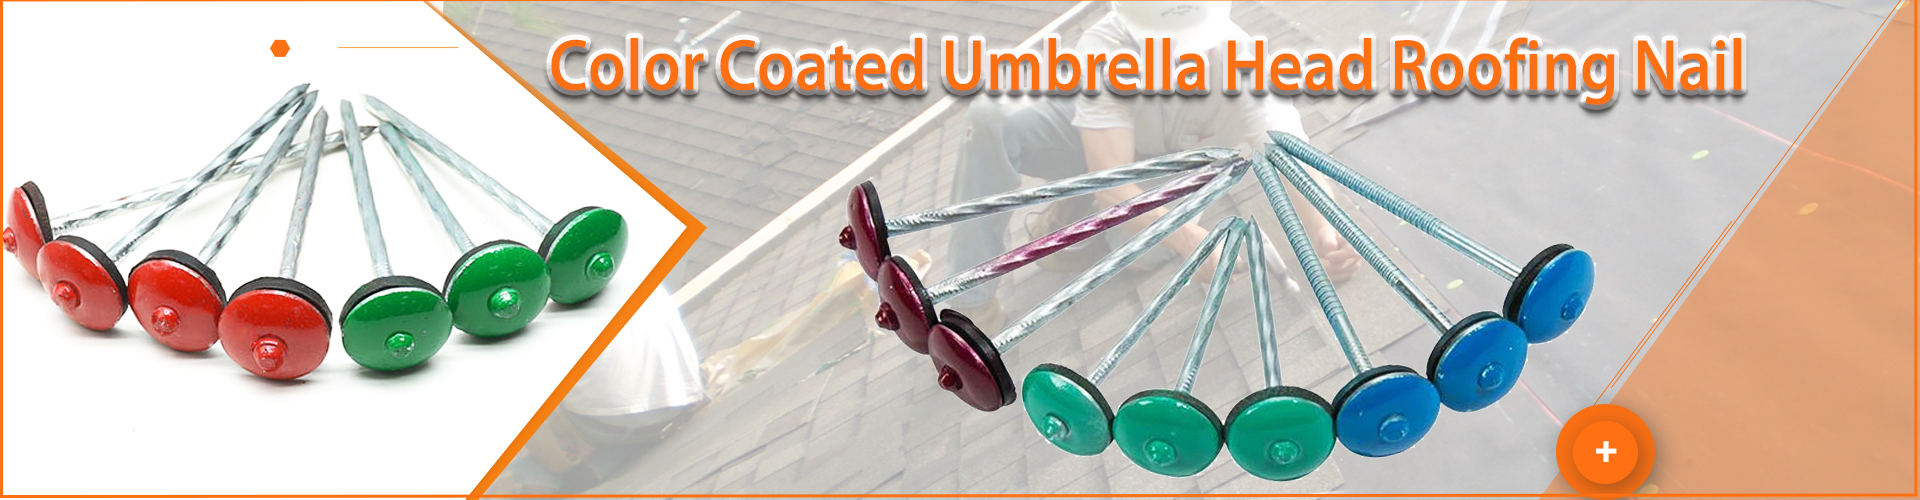 Color Coated Umbrella Head Roofing Nail